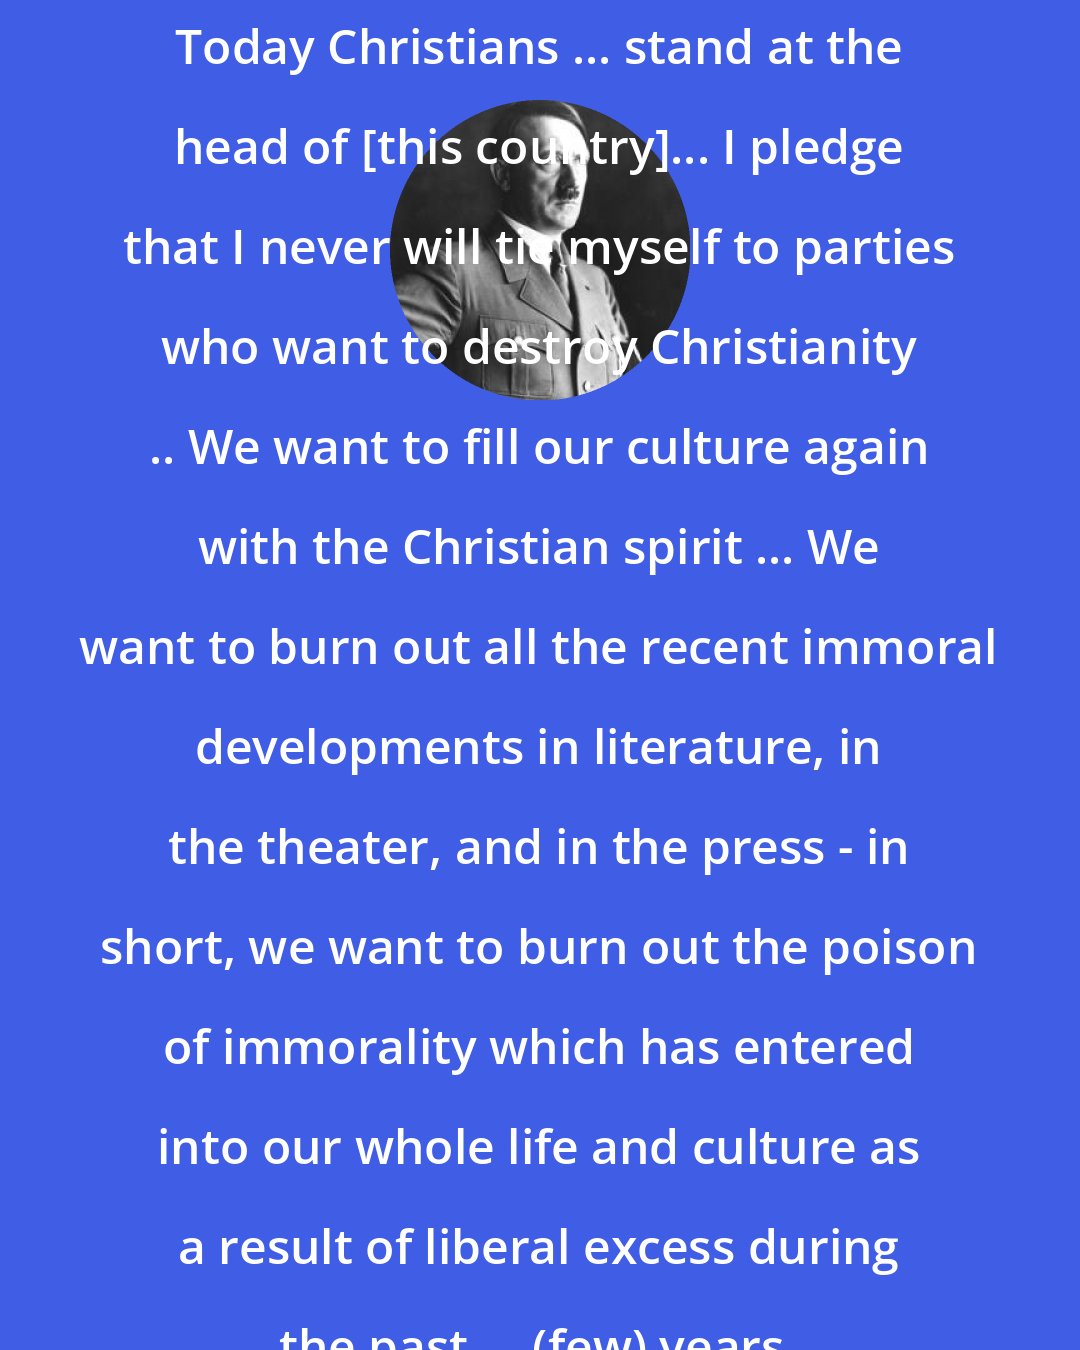 Adolf Hitler: Today Christians ... stand at the head of [this country]... I pledge that I never will tie myself to parties who want to destroy Christianity .. We want to fill our culture again with the Christian spirit ... We want to burn out all the recent immoral developments in literature, in the theater, and in the press - in short, we want to burn out the poison of immorality which has entered into our whole life and culture as a result of liberal excess during the past ... (few) years.